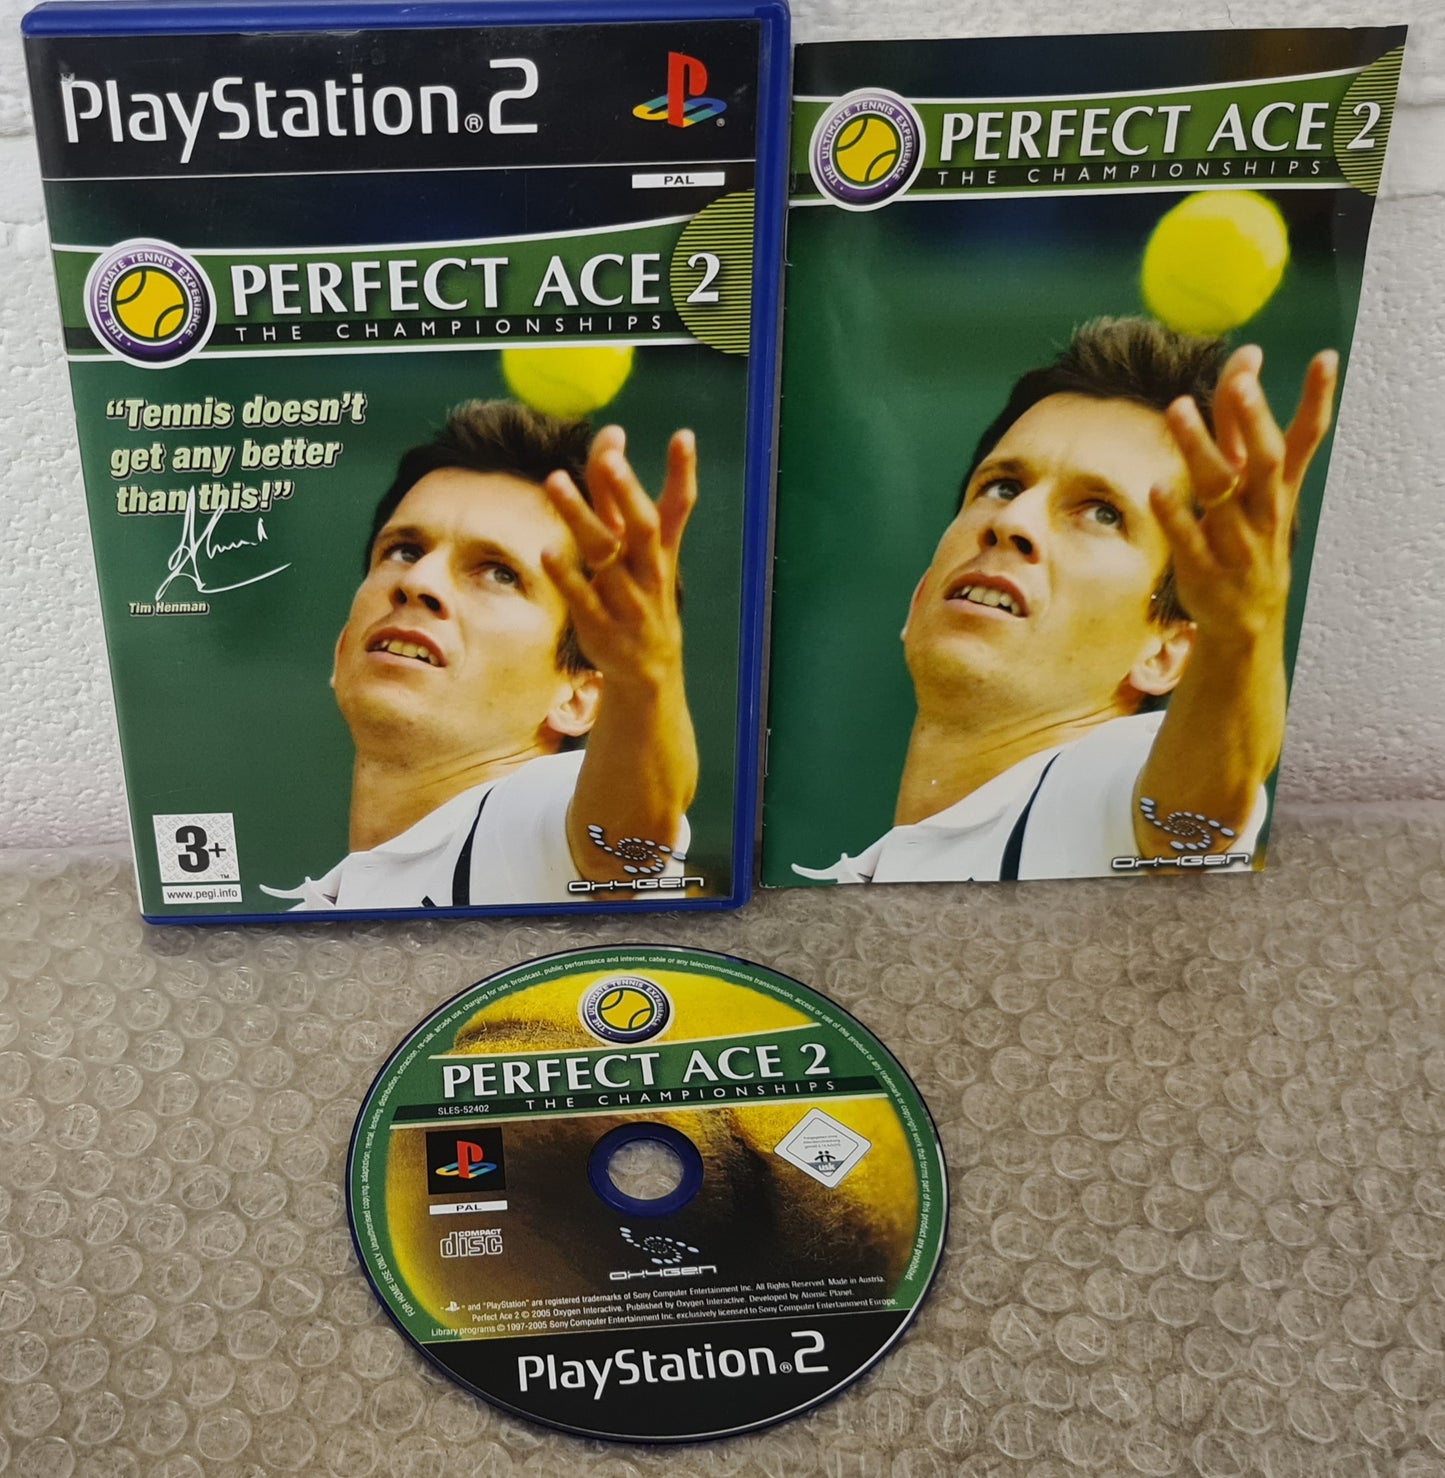 Perfect Ace 2 the Championships Sony Playstation 2 (PS2) Game